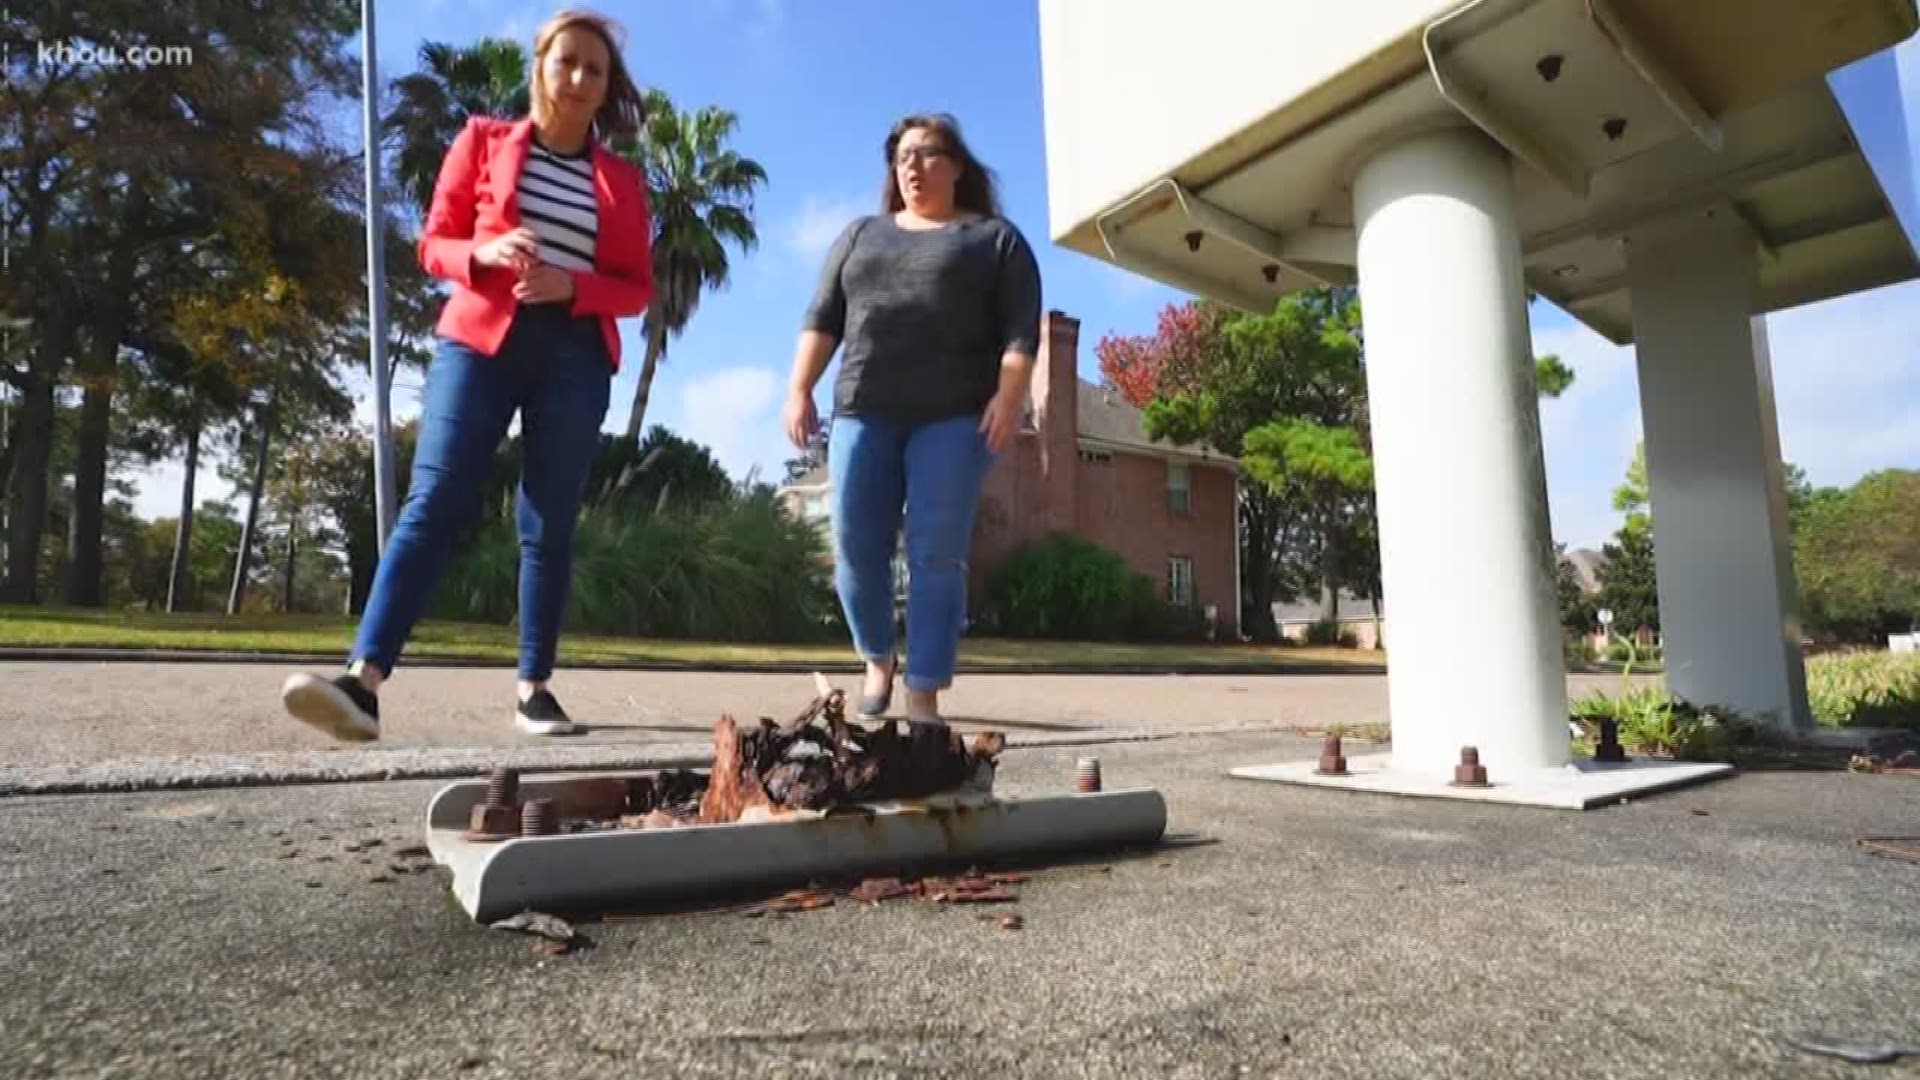 When a cluster mailbox fell over in Amy Anderson’s Atascocita neighborhood, she wasn’t worried about the post office’s response. Months earlier, the same thing happened to another box, and it was replaced immediately. But this time, there seemed to be no rush.